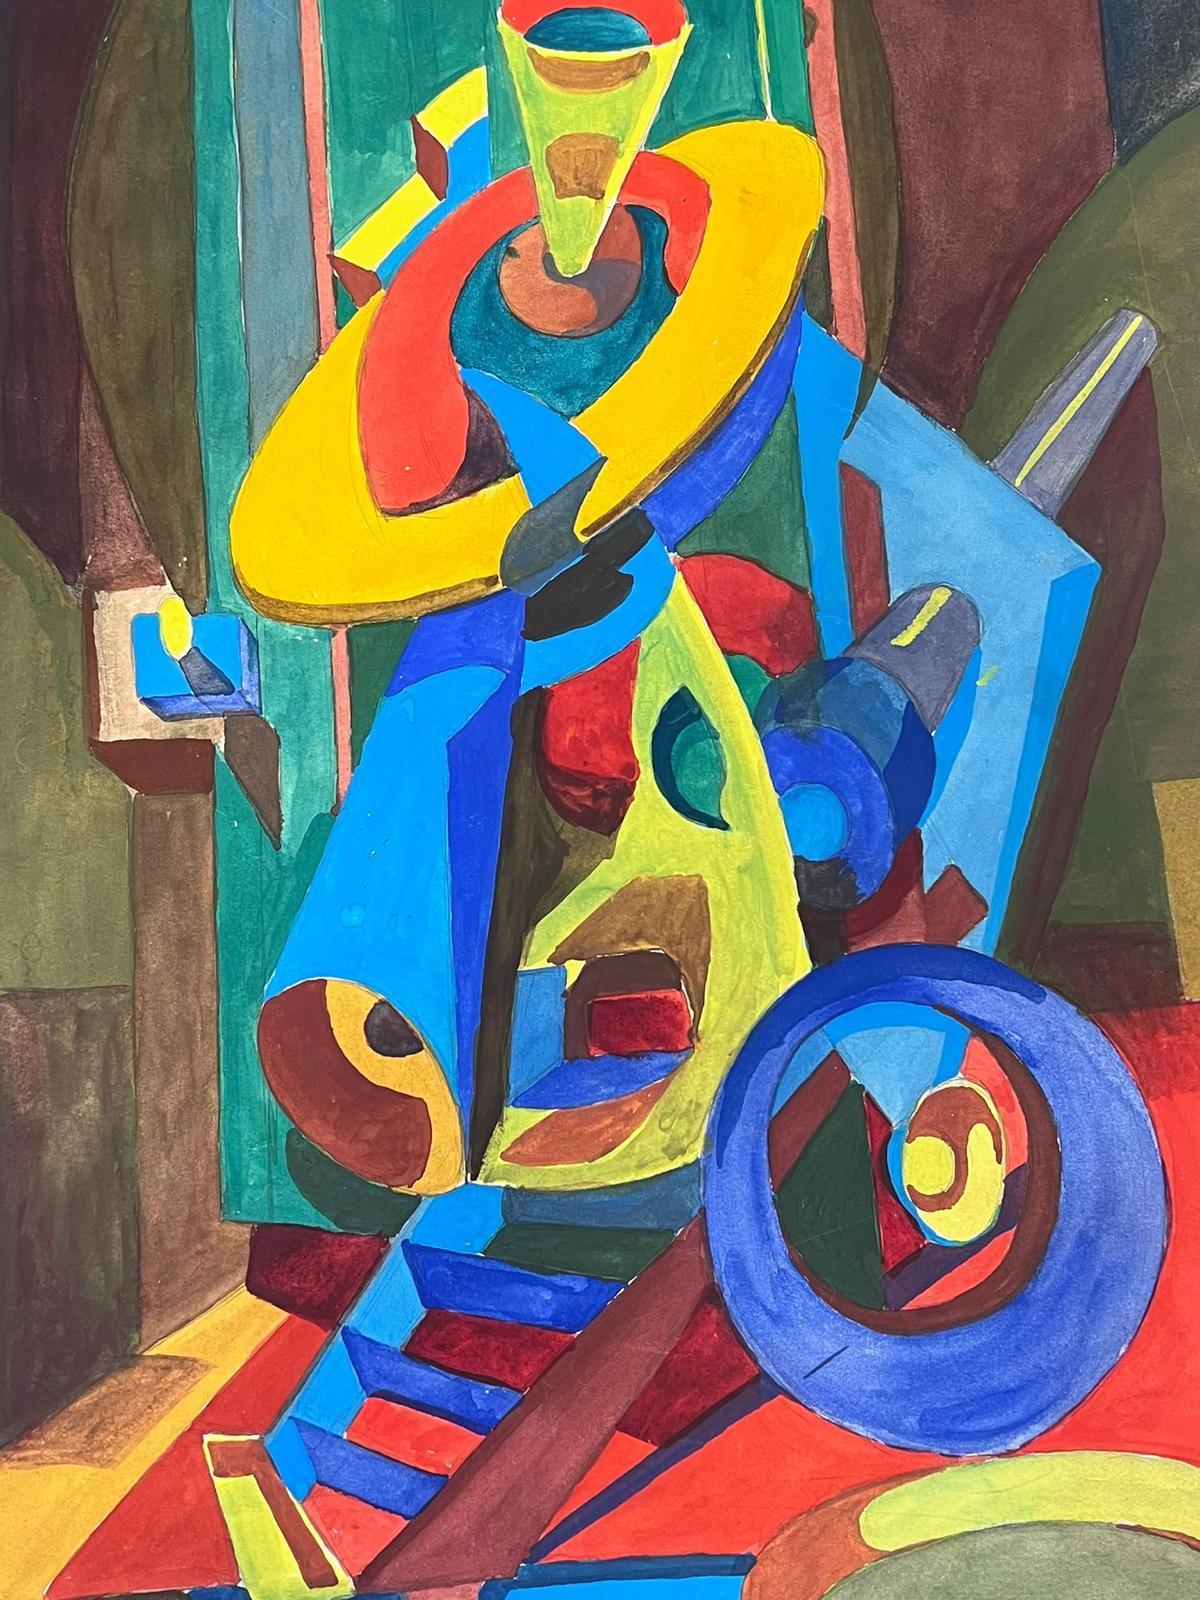 Abstract Composition
by Guy Nicod
(French 1923 - 2021)
watercolour on artist paper, unframed
painting : 20 x 14 inches
provenance: artists estate, France
condition: very good and sound condition